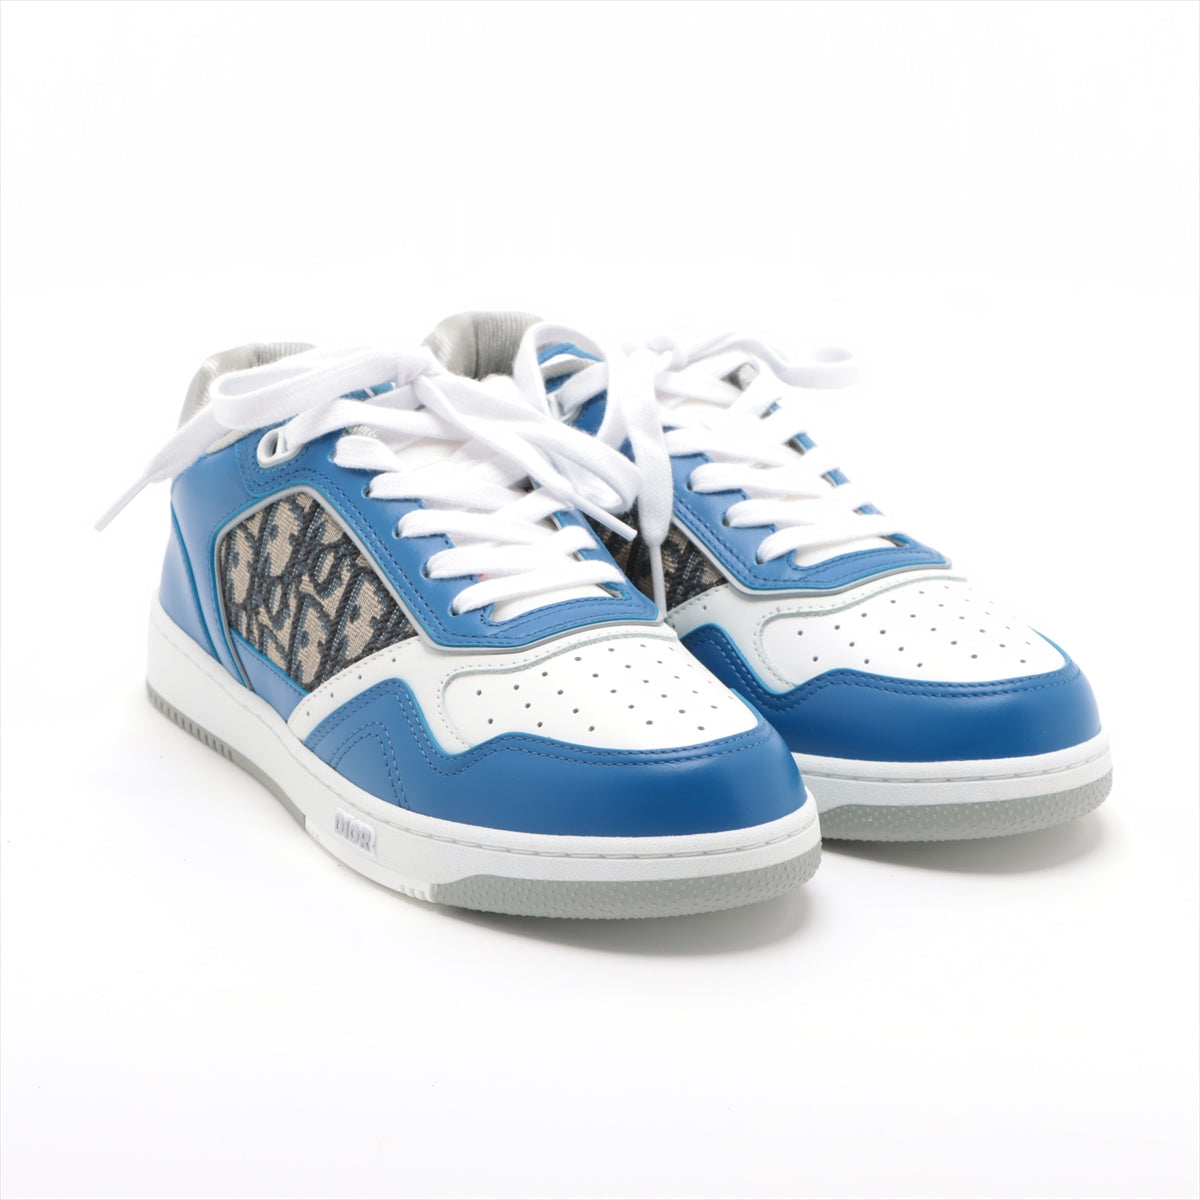 DIOR B27 Leather Sneakers 40 Men's Blue x white FA0322 Oblique Is there a replacement string